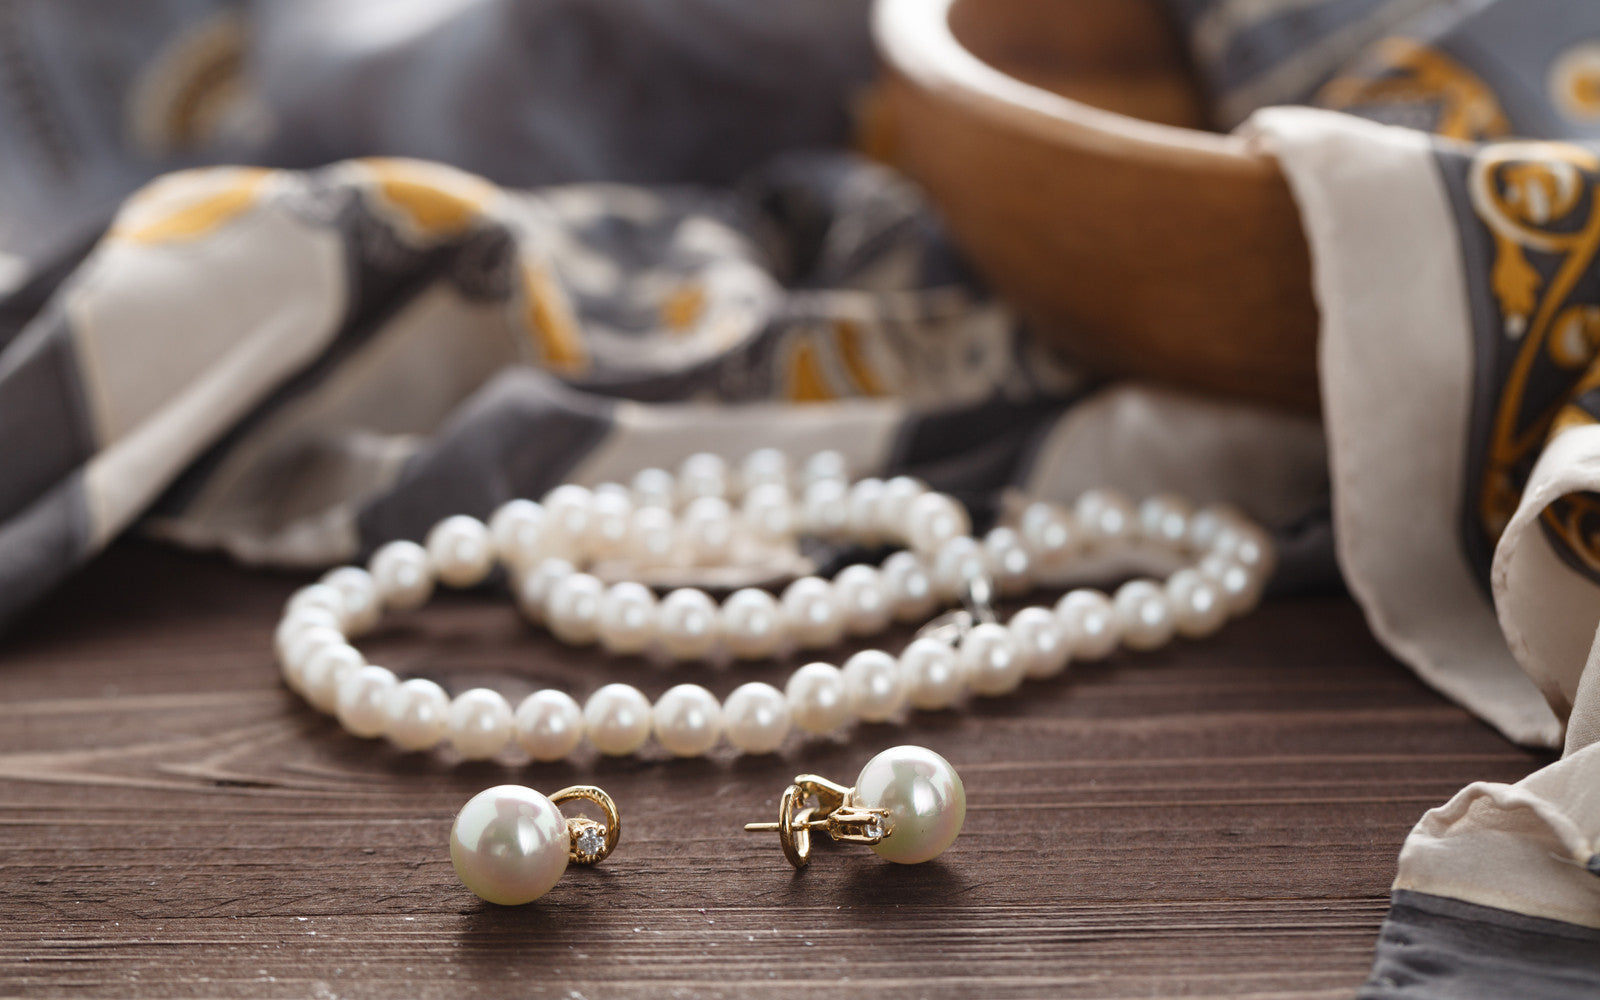 Enhance the beauty of pearls set by wearing them!